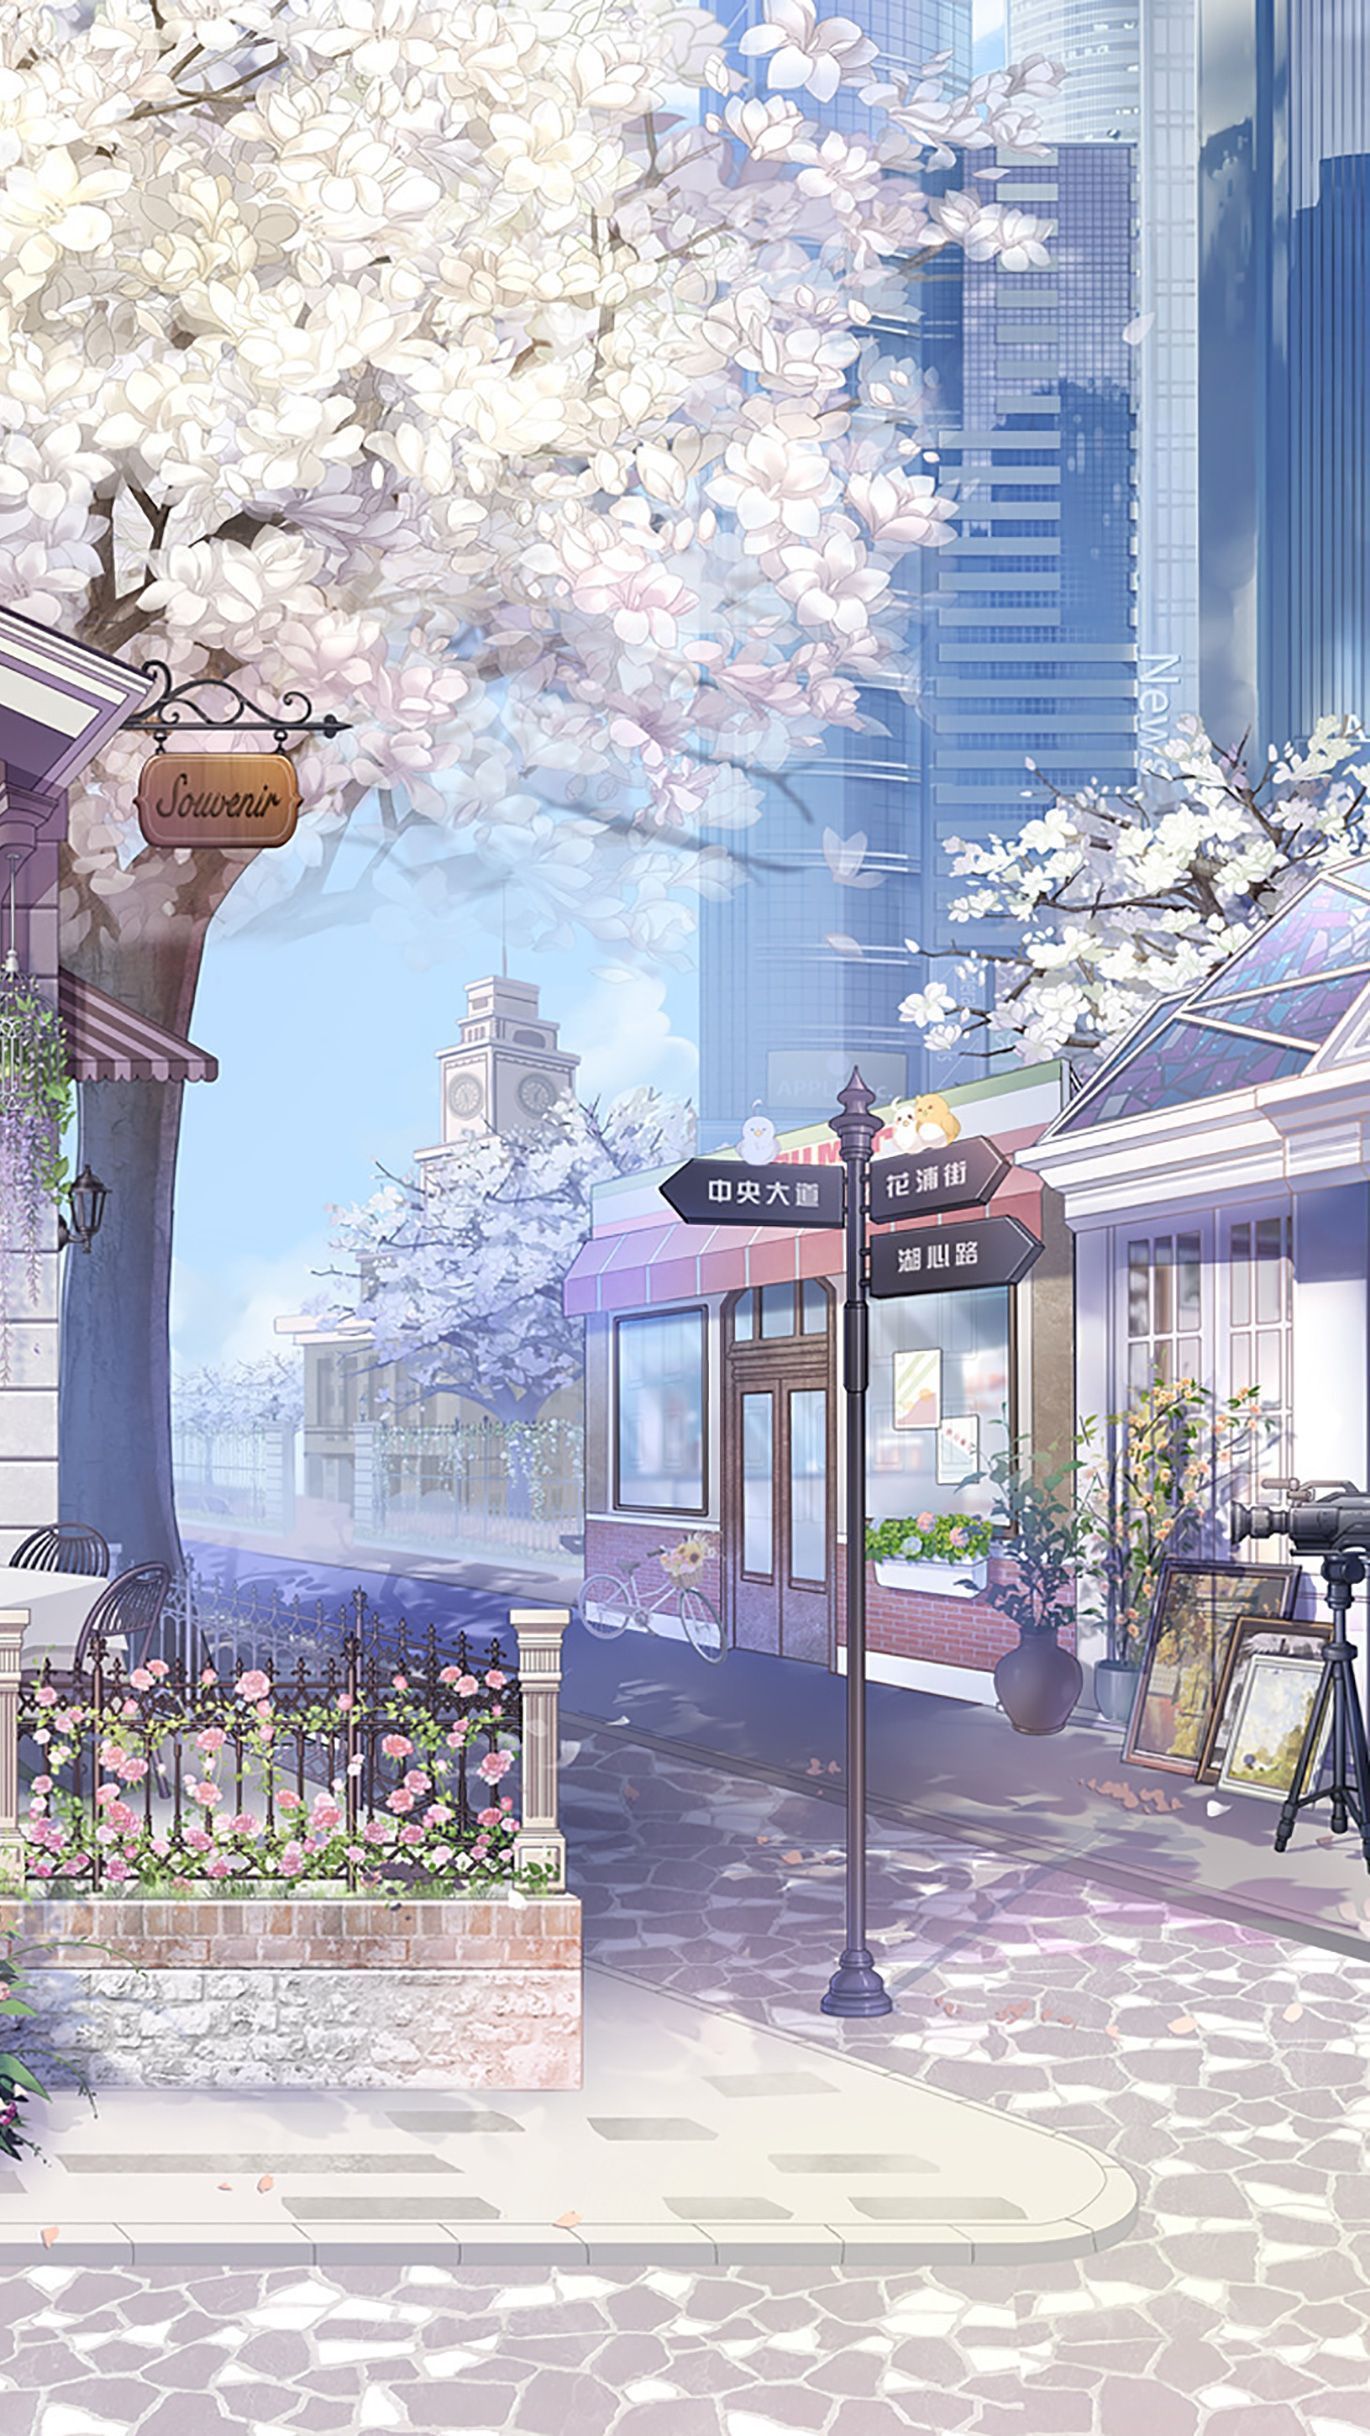 Japan Aesthetic Tumblr and Pinterest  Anime backgrounds wallpapers, Anime  scenery wallpaper, City background